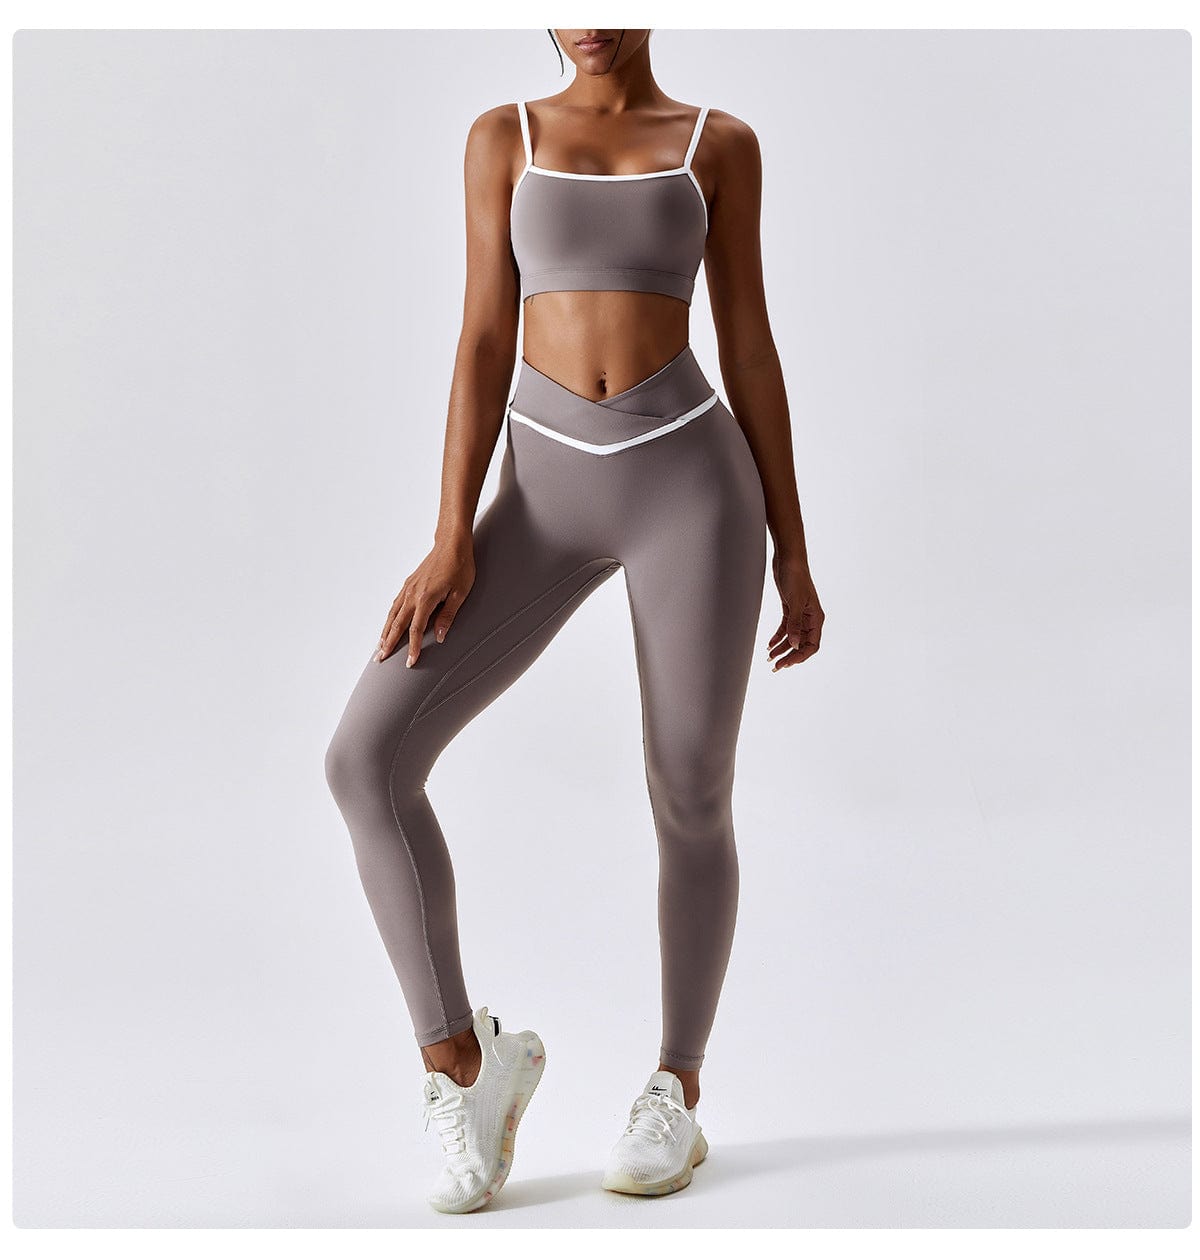 SqueezMeSkinny Exercise Quick Drying Workout Clothes